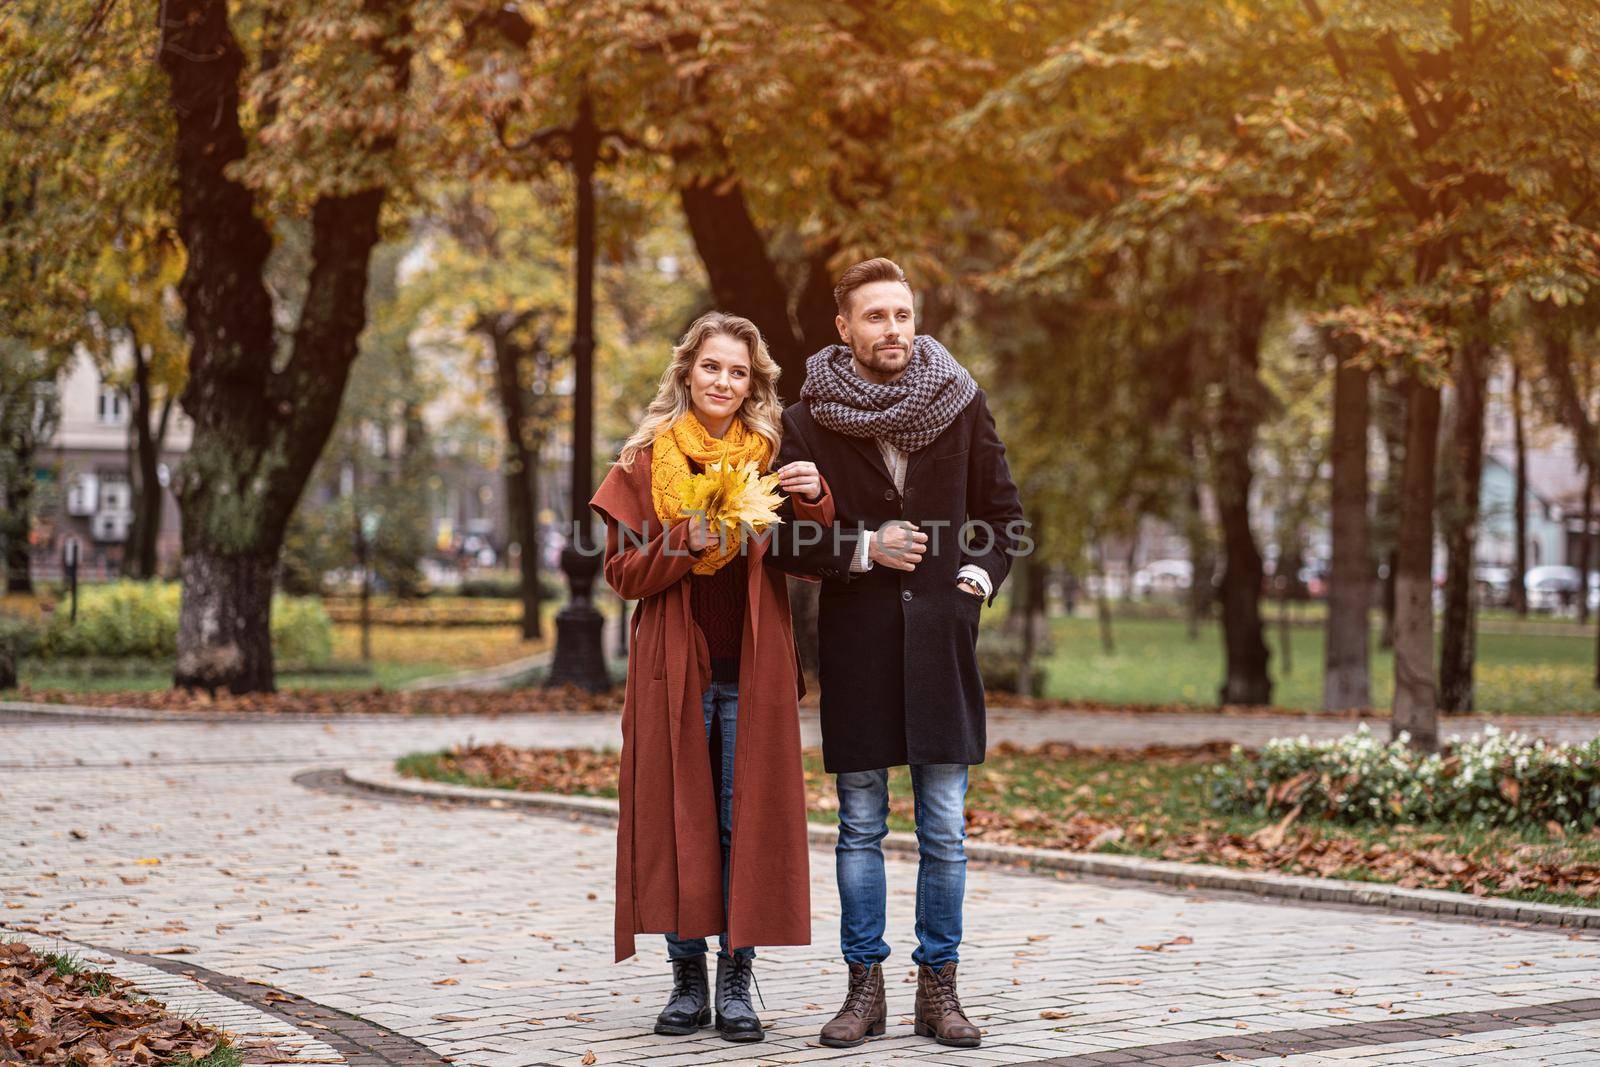 Full length portrait of a couple on a date walking in the autumn park holding hands. Outdoor shot of a young couple in love walking along a path through a autumn park.